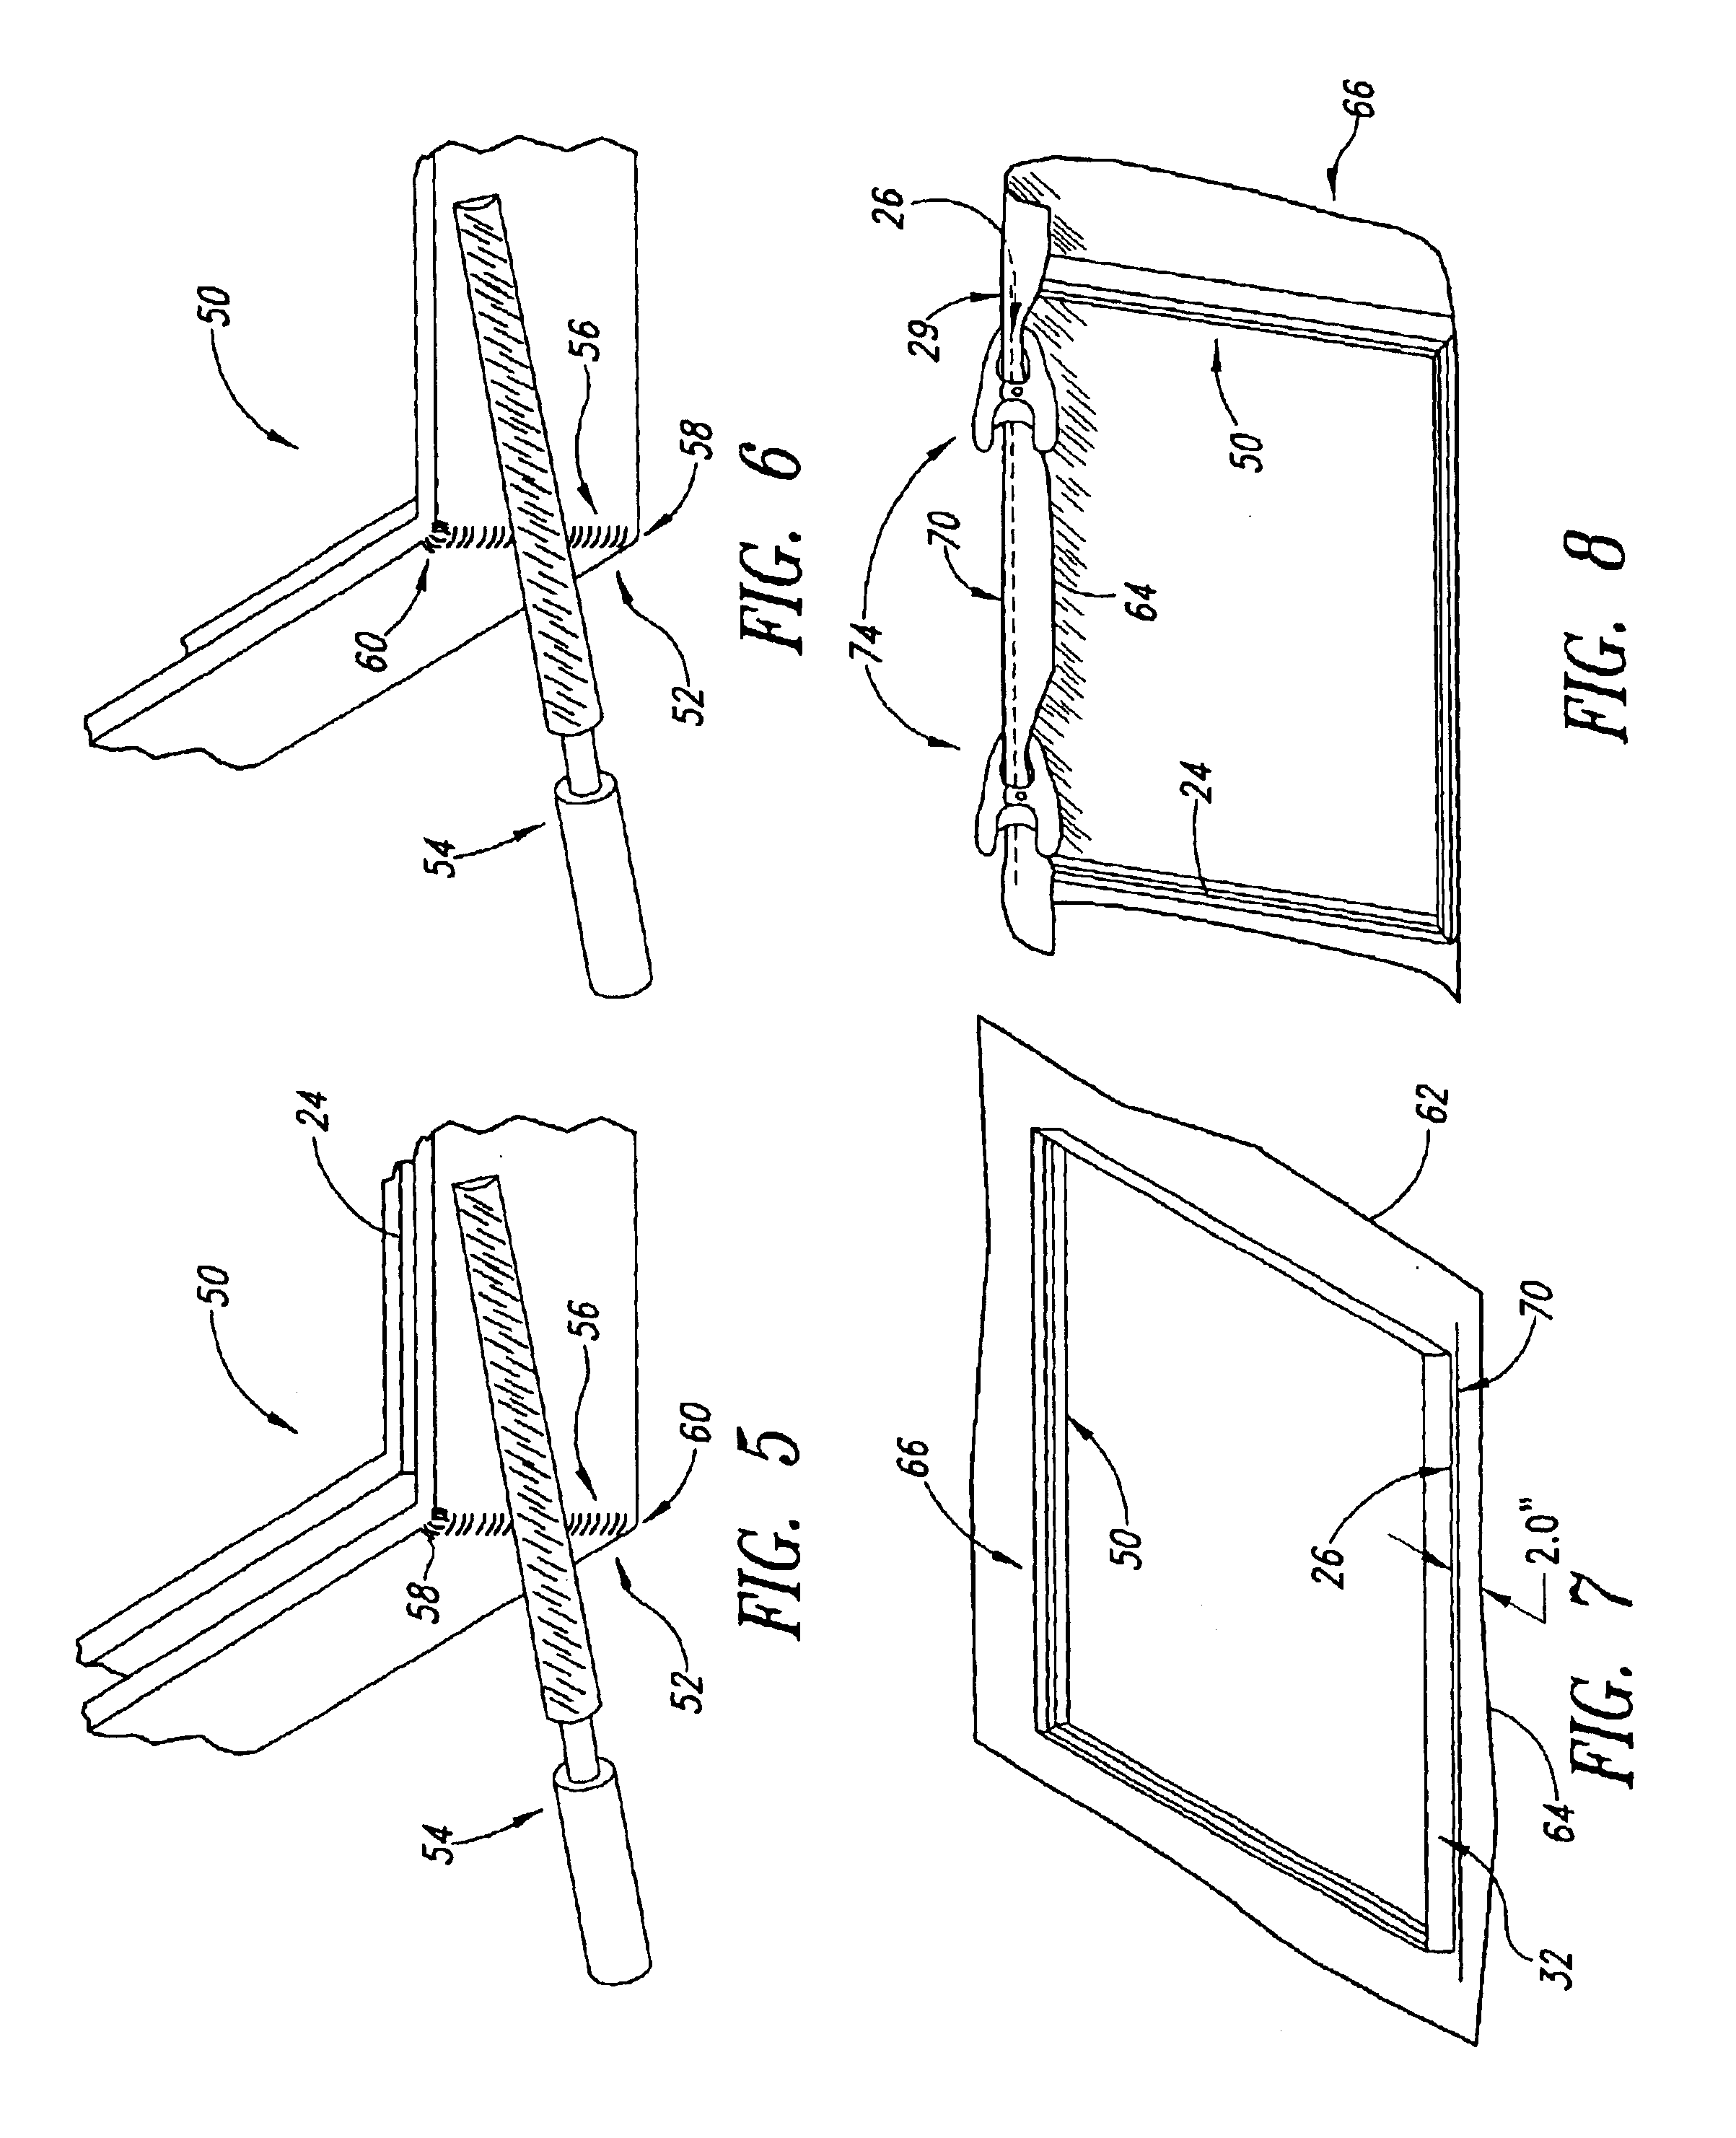 Method of attaching canvas to a frame